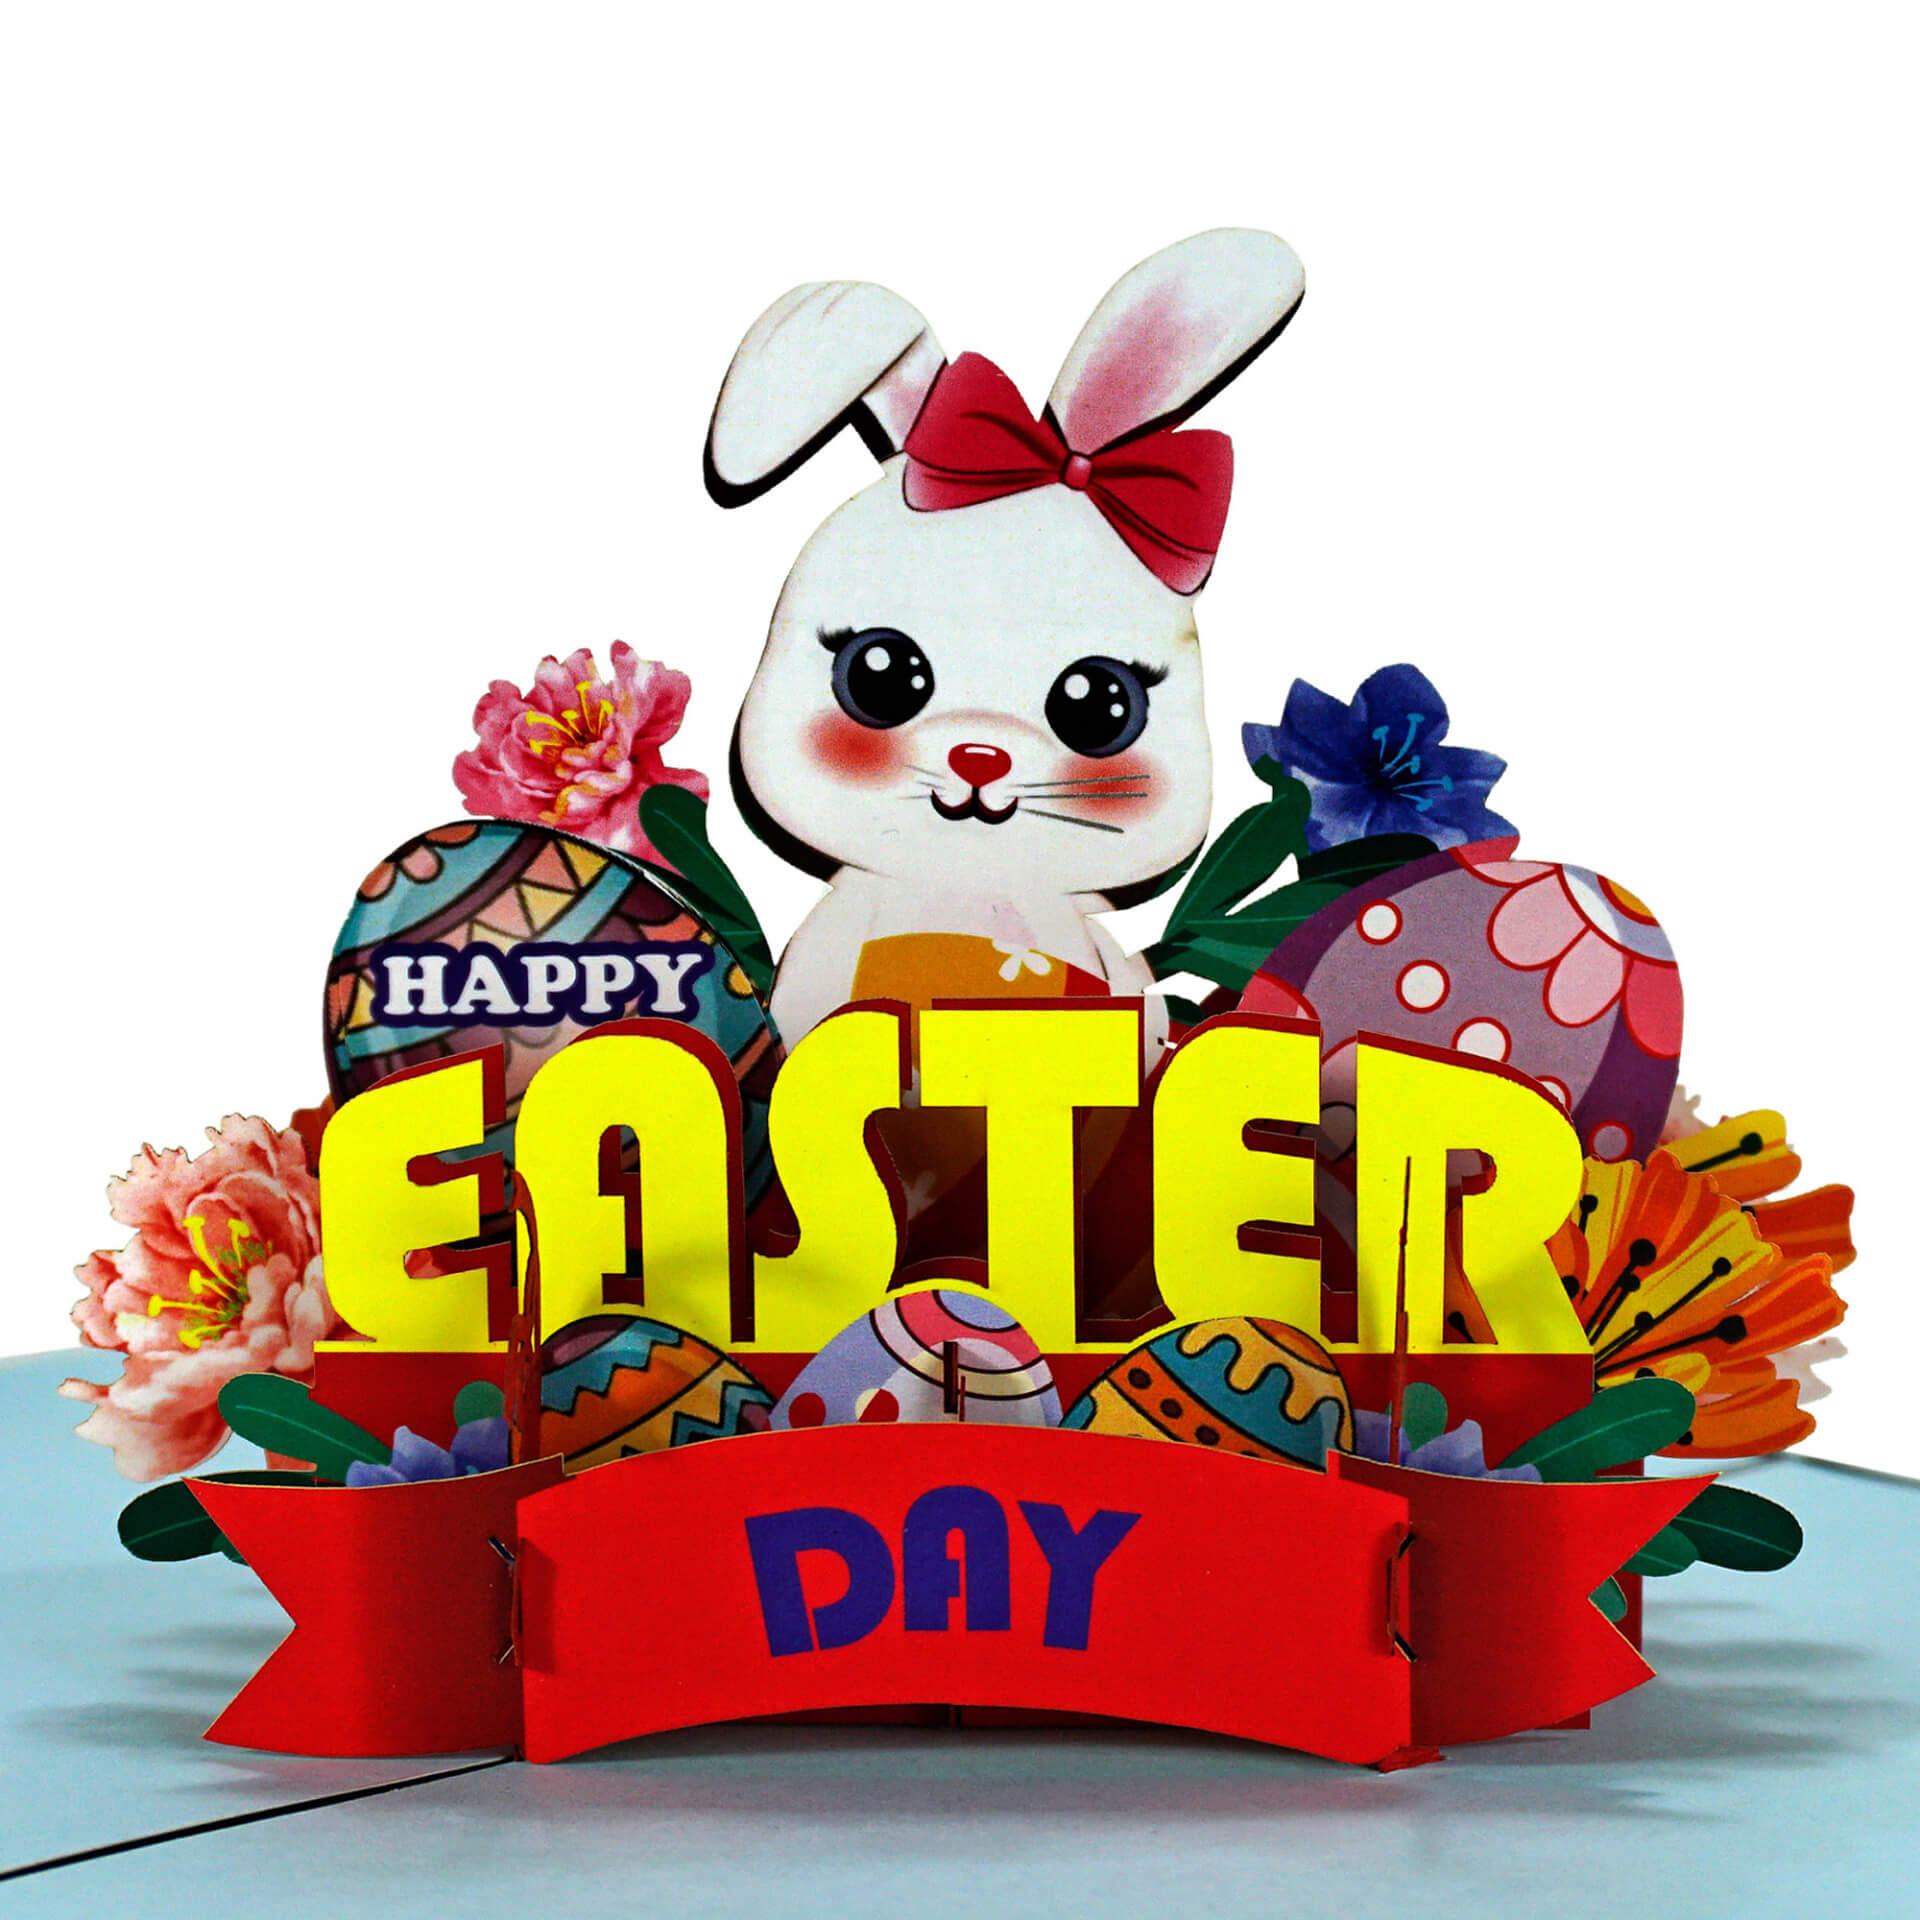 3D popup greeting card for Easter day